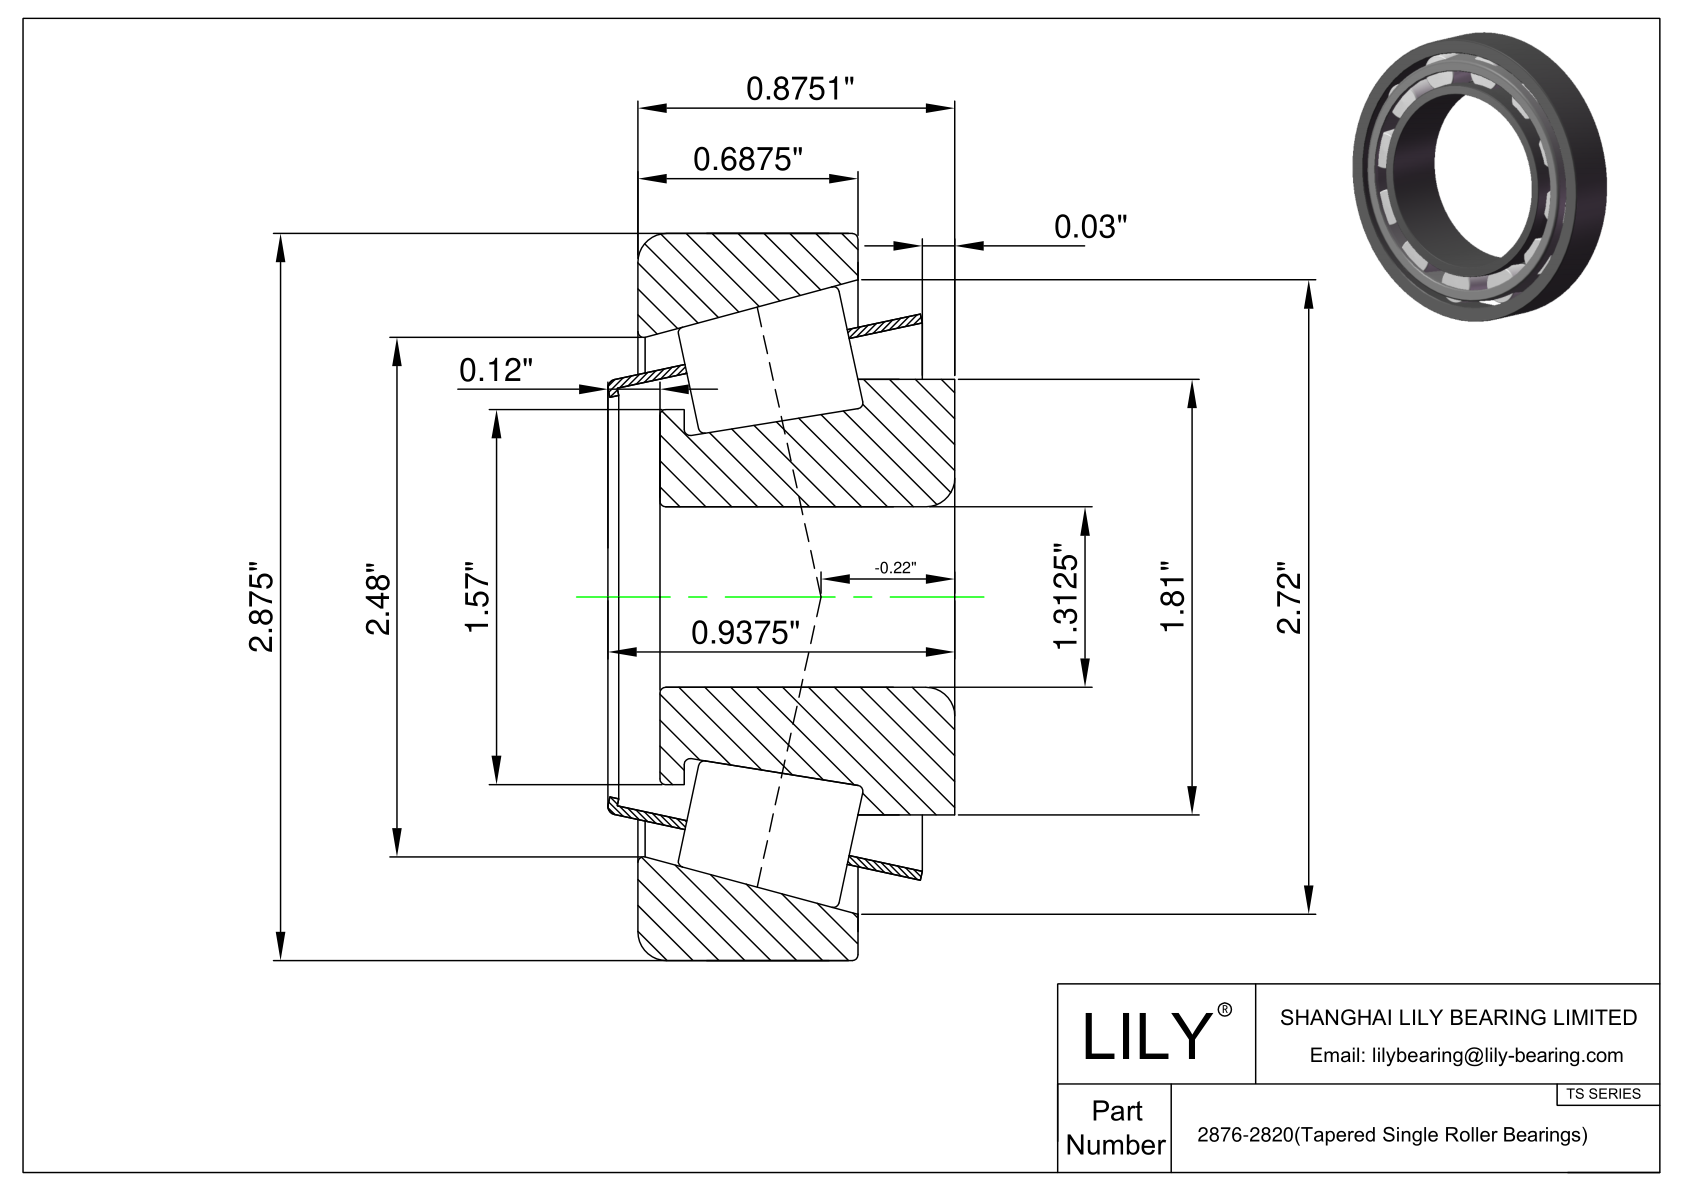 2876-2820 TS (Tapered Single Roller Bearings) (Imperial) cad drawing